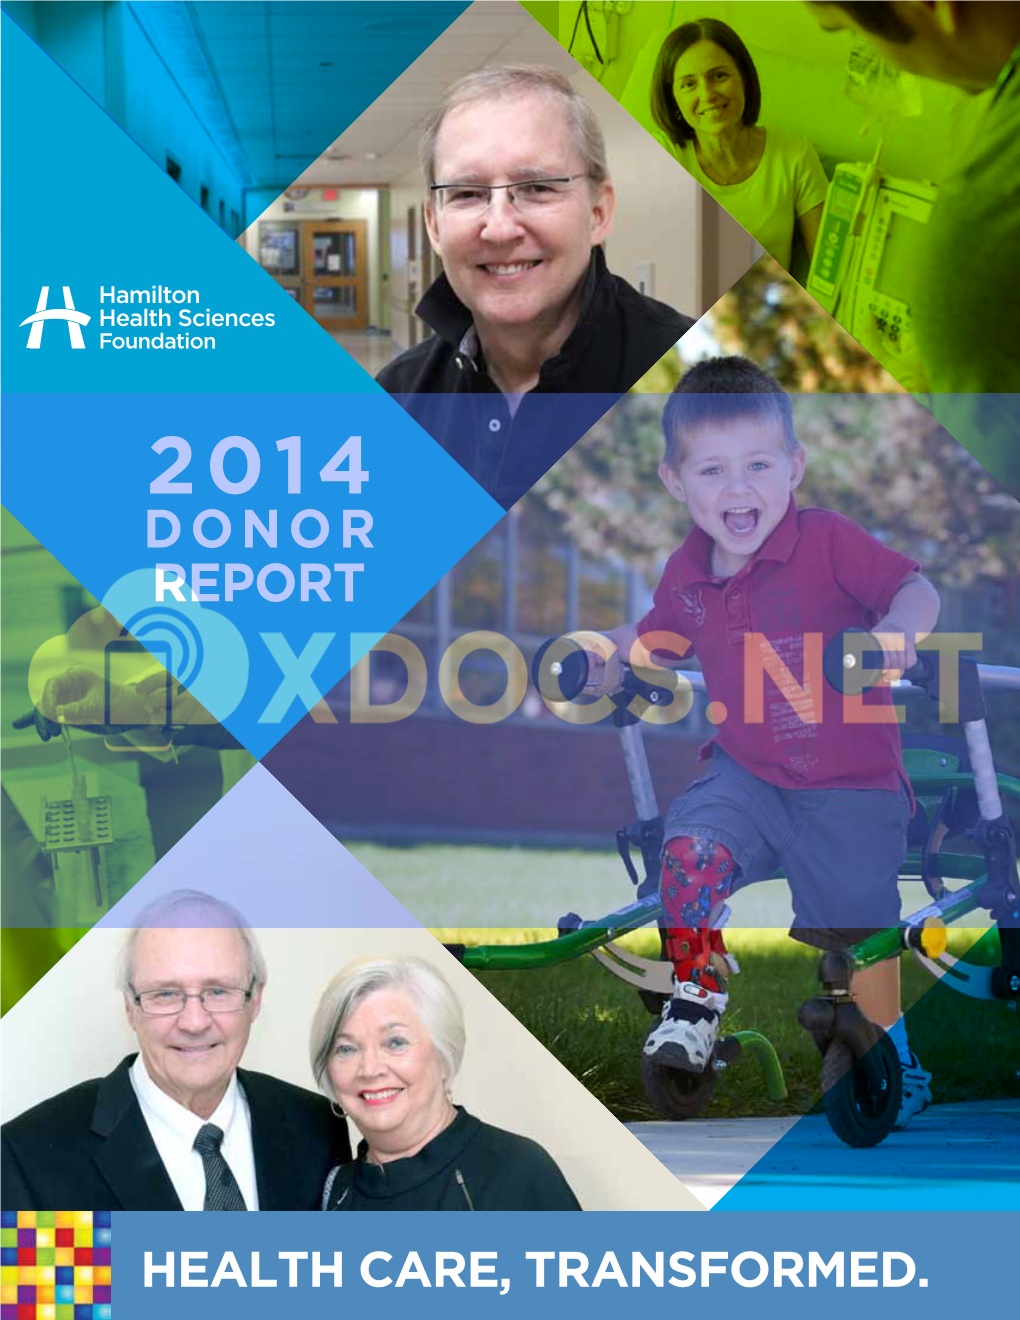 Donor Report